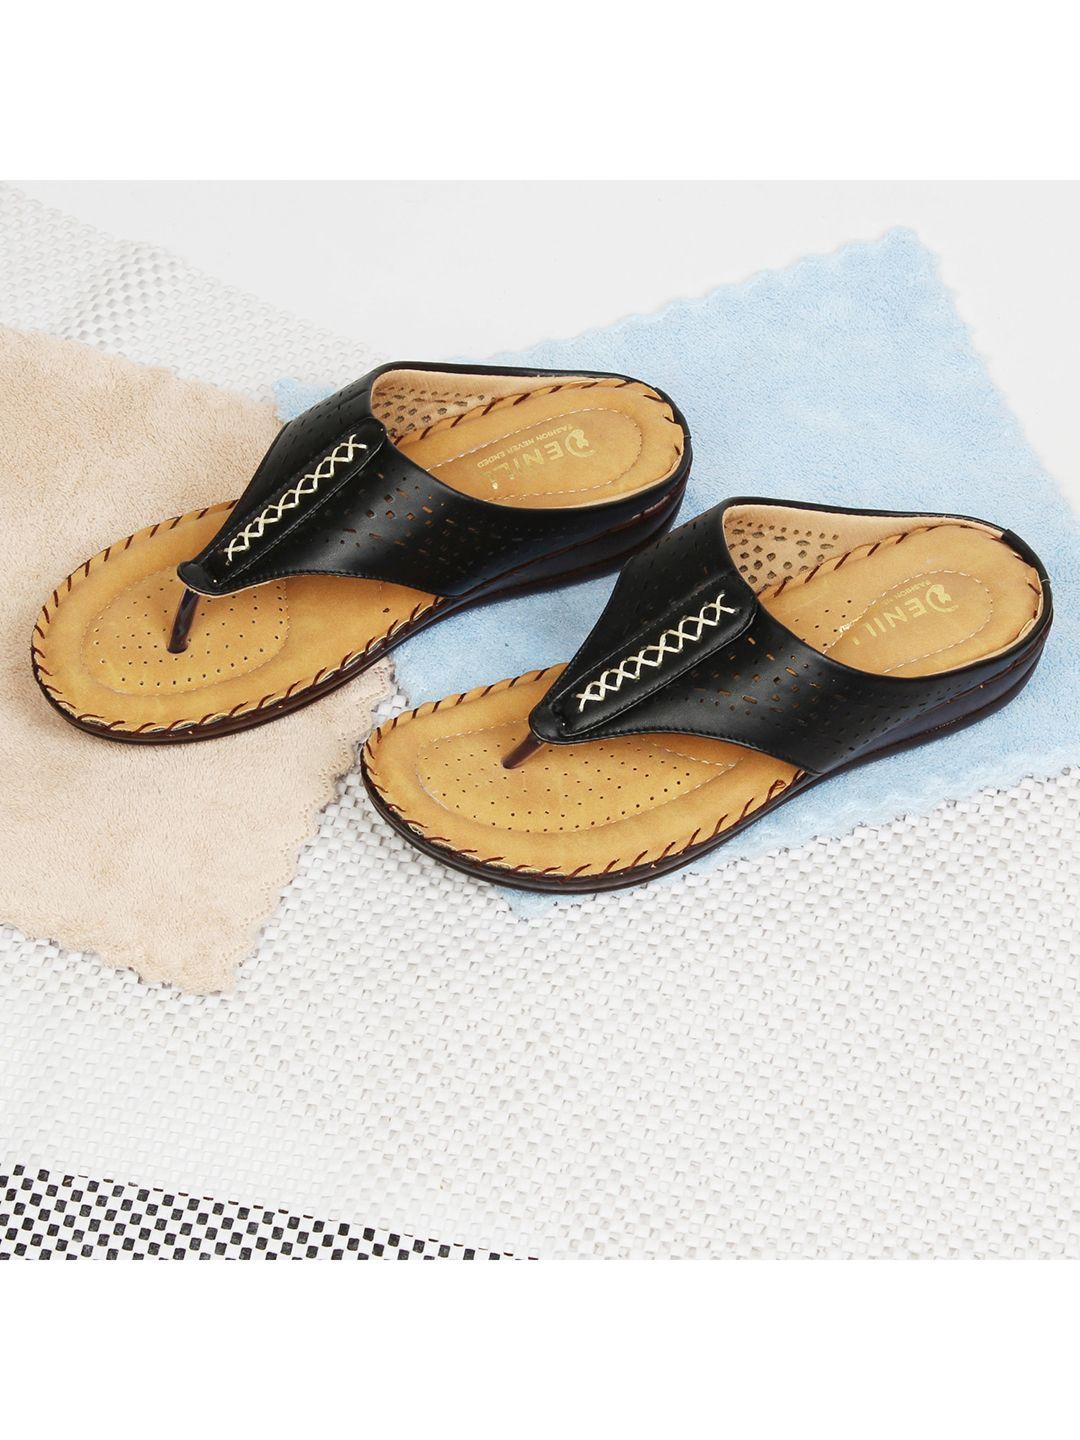 denill black & brown comfort sandals with laser cuts